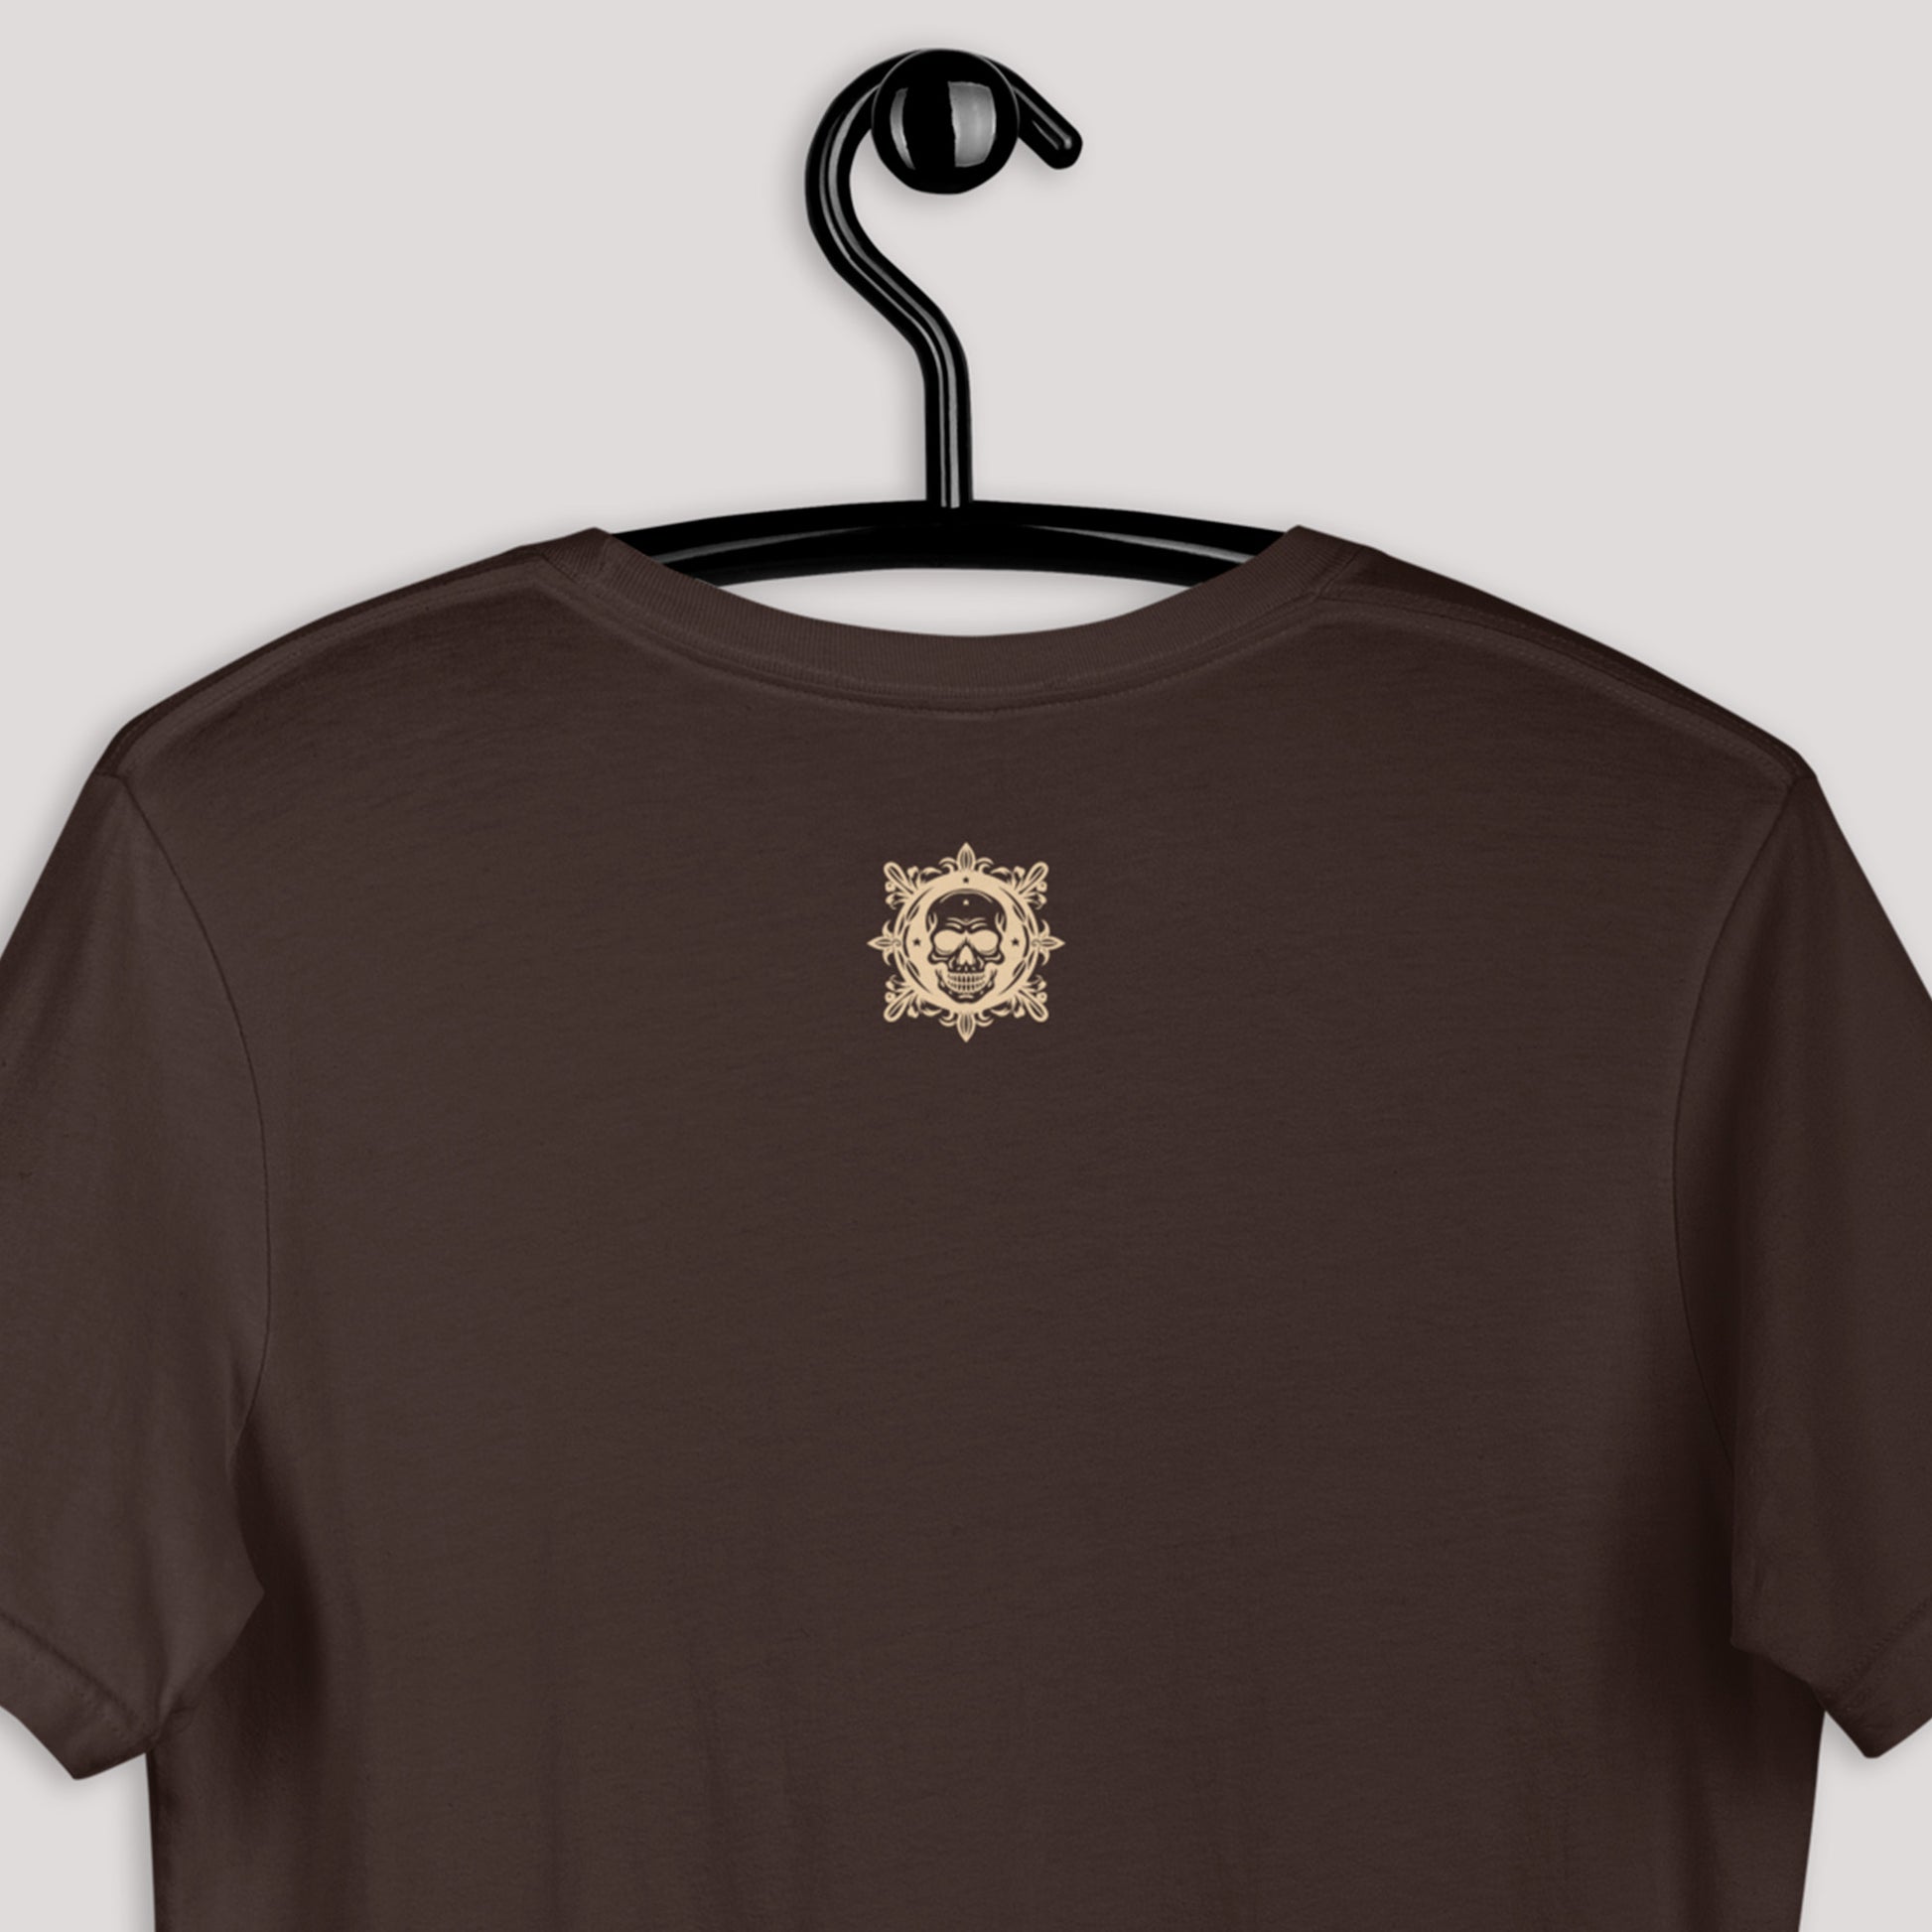 closeup of logo on back of brown Dairy Doll Unisex t-shirt